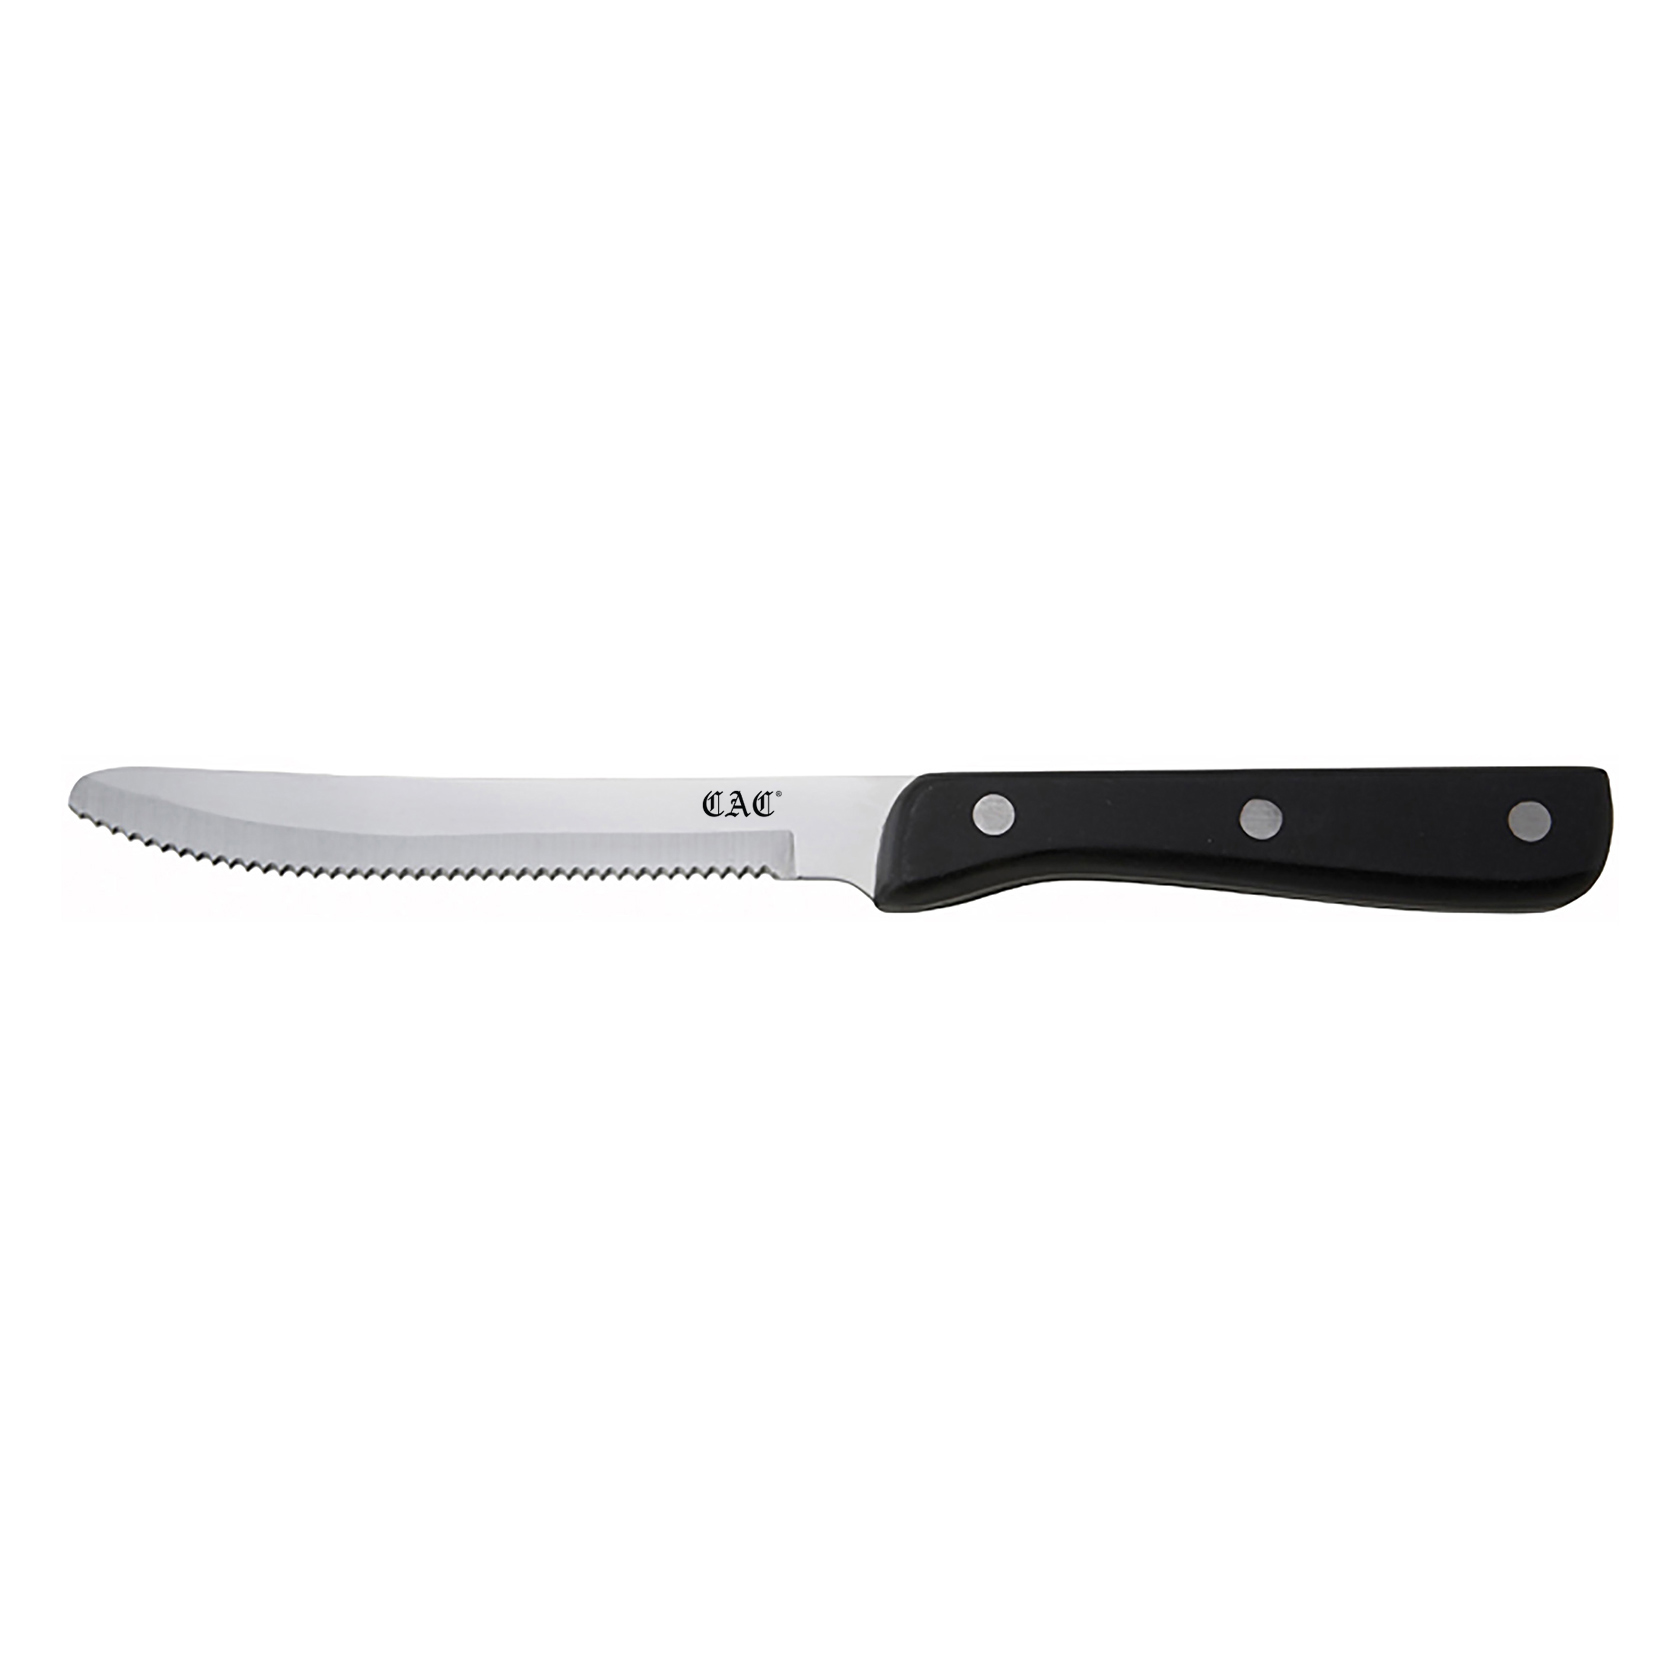 CAC China KPSK-50F Knife Steak with Round Tip, Forged Full Tang Plastic Handle 5" - 1 dozen